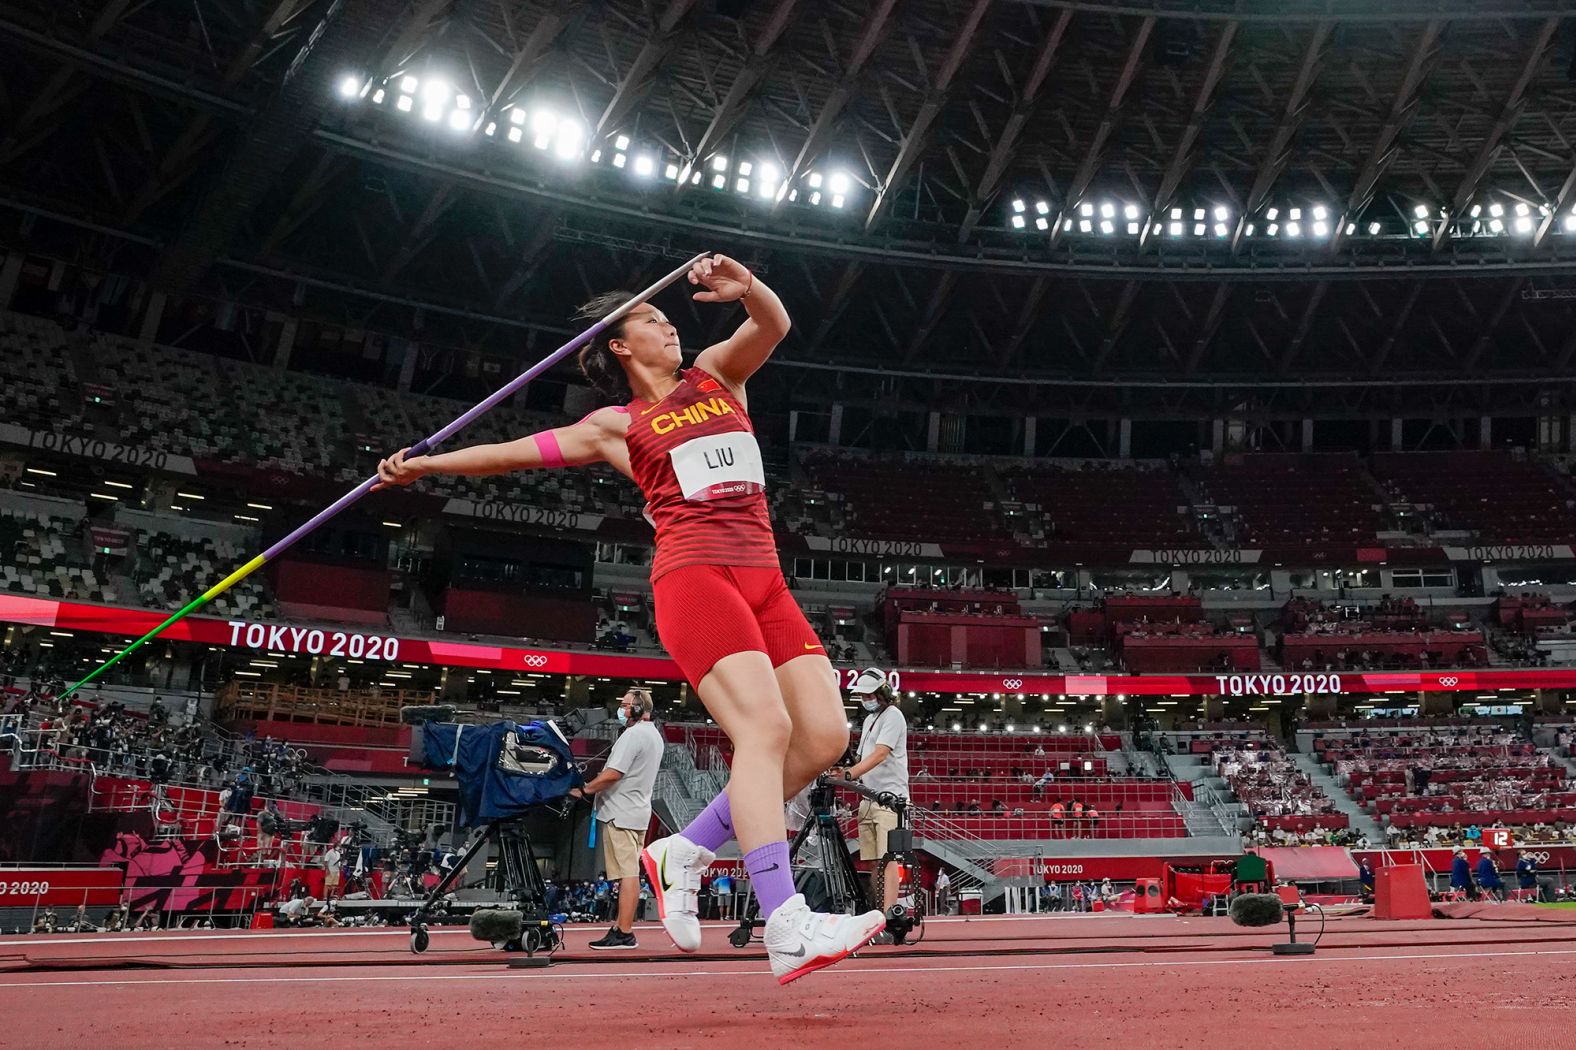 China's Liu Shiying competes in the <a href="index.php?page=&url=https%3A%2F%2Fwww.cnn.com%2Fworld%2Flive-news%2Ftokyo-2020-olympics-08-06-21-spt%2Fh_5fff32ba0db7c8df821a21f71967b380" target="_blank">javelin final</a> on August 6. Her first throw of 66.34 meters was enough to secure the gold medal.